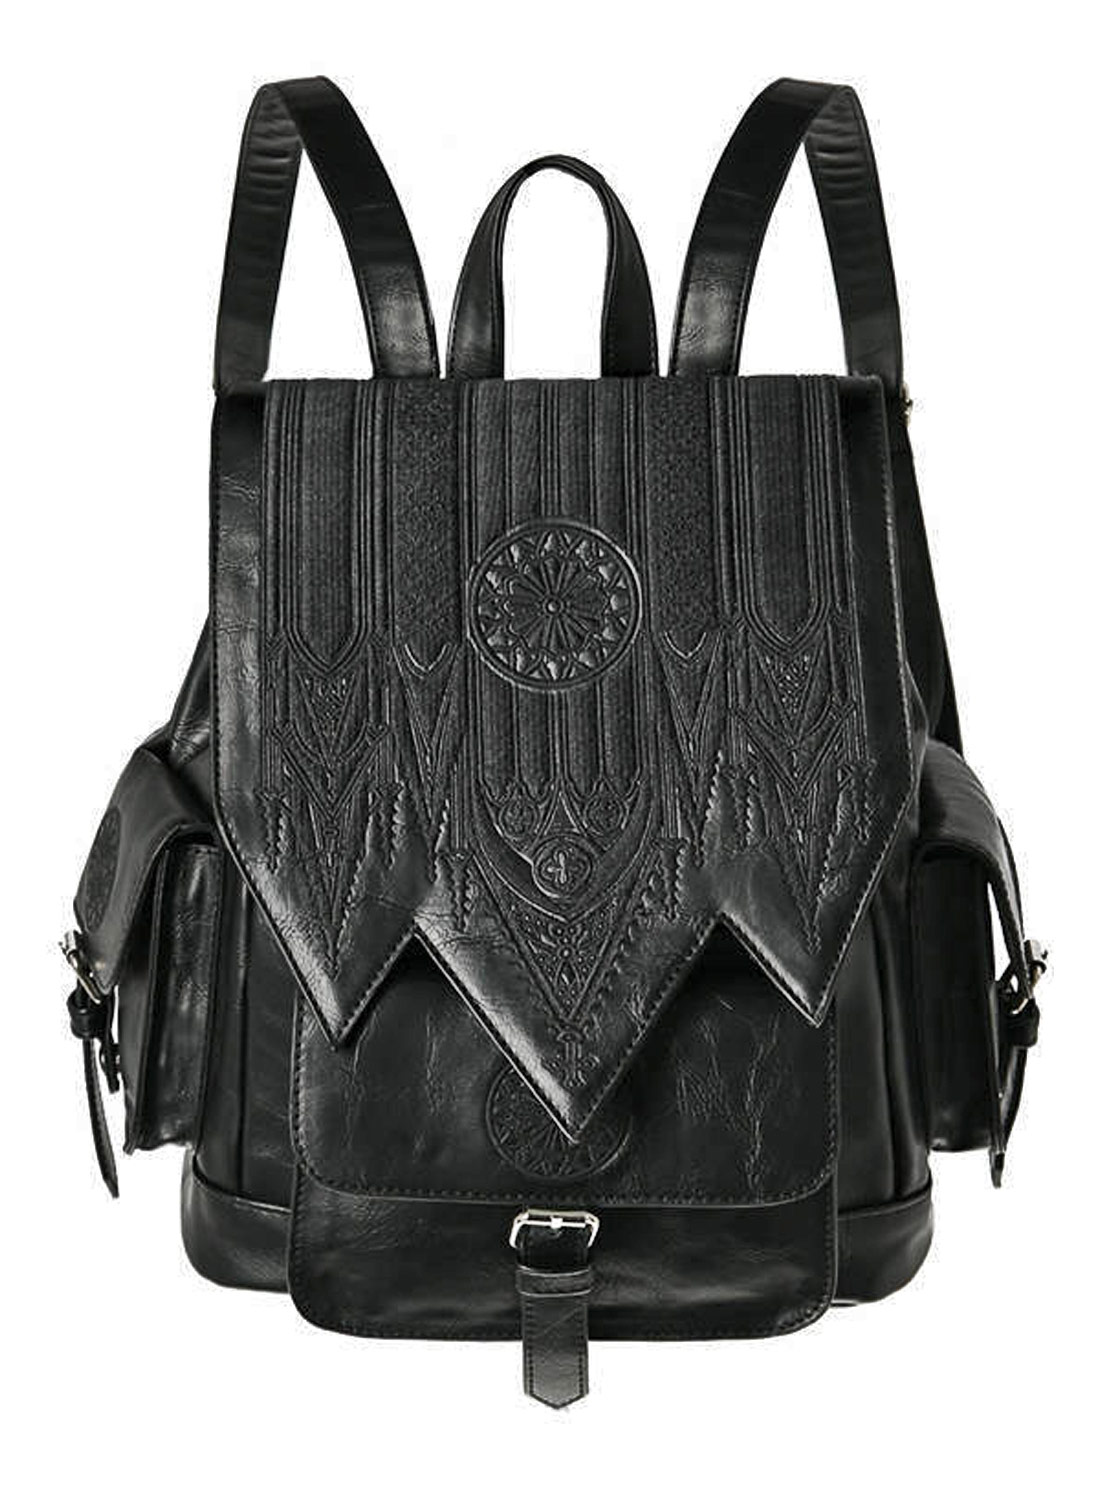 Cathedral Rosette Backpack